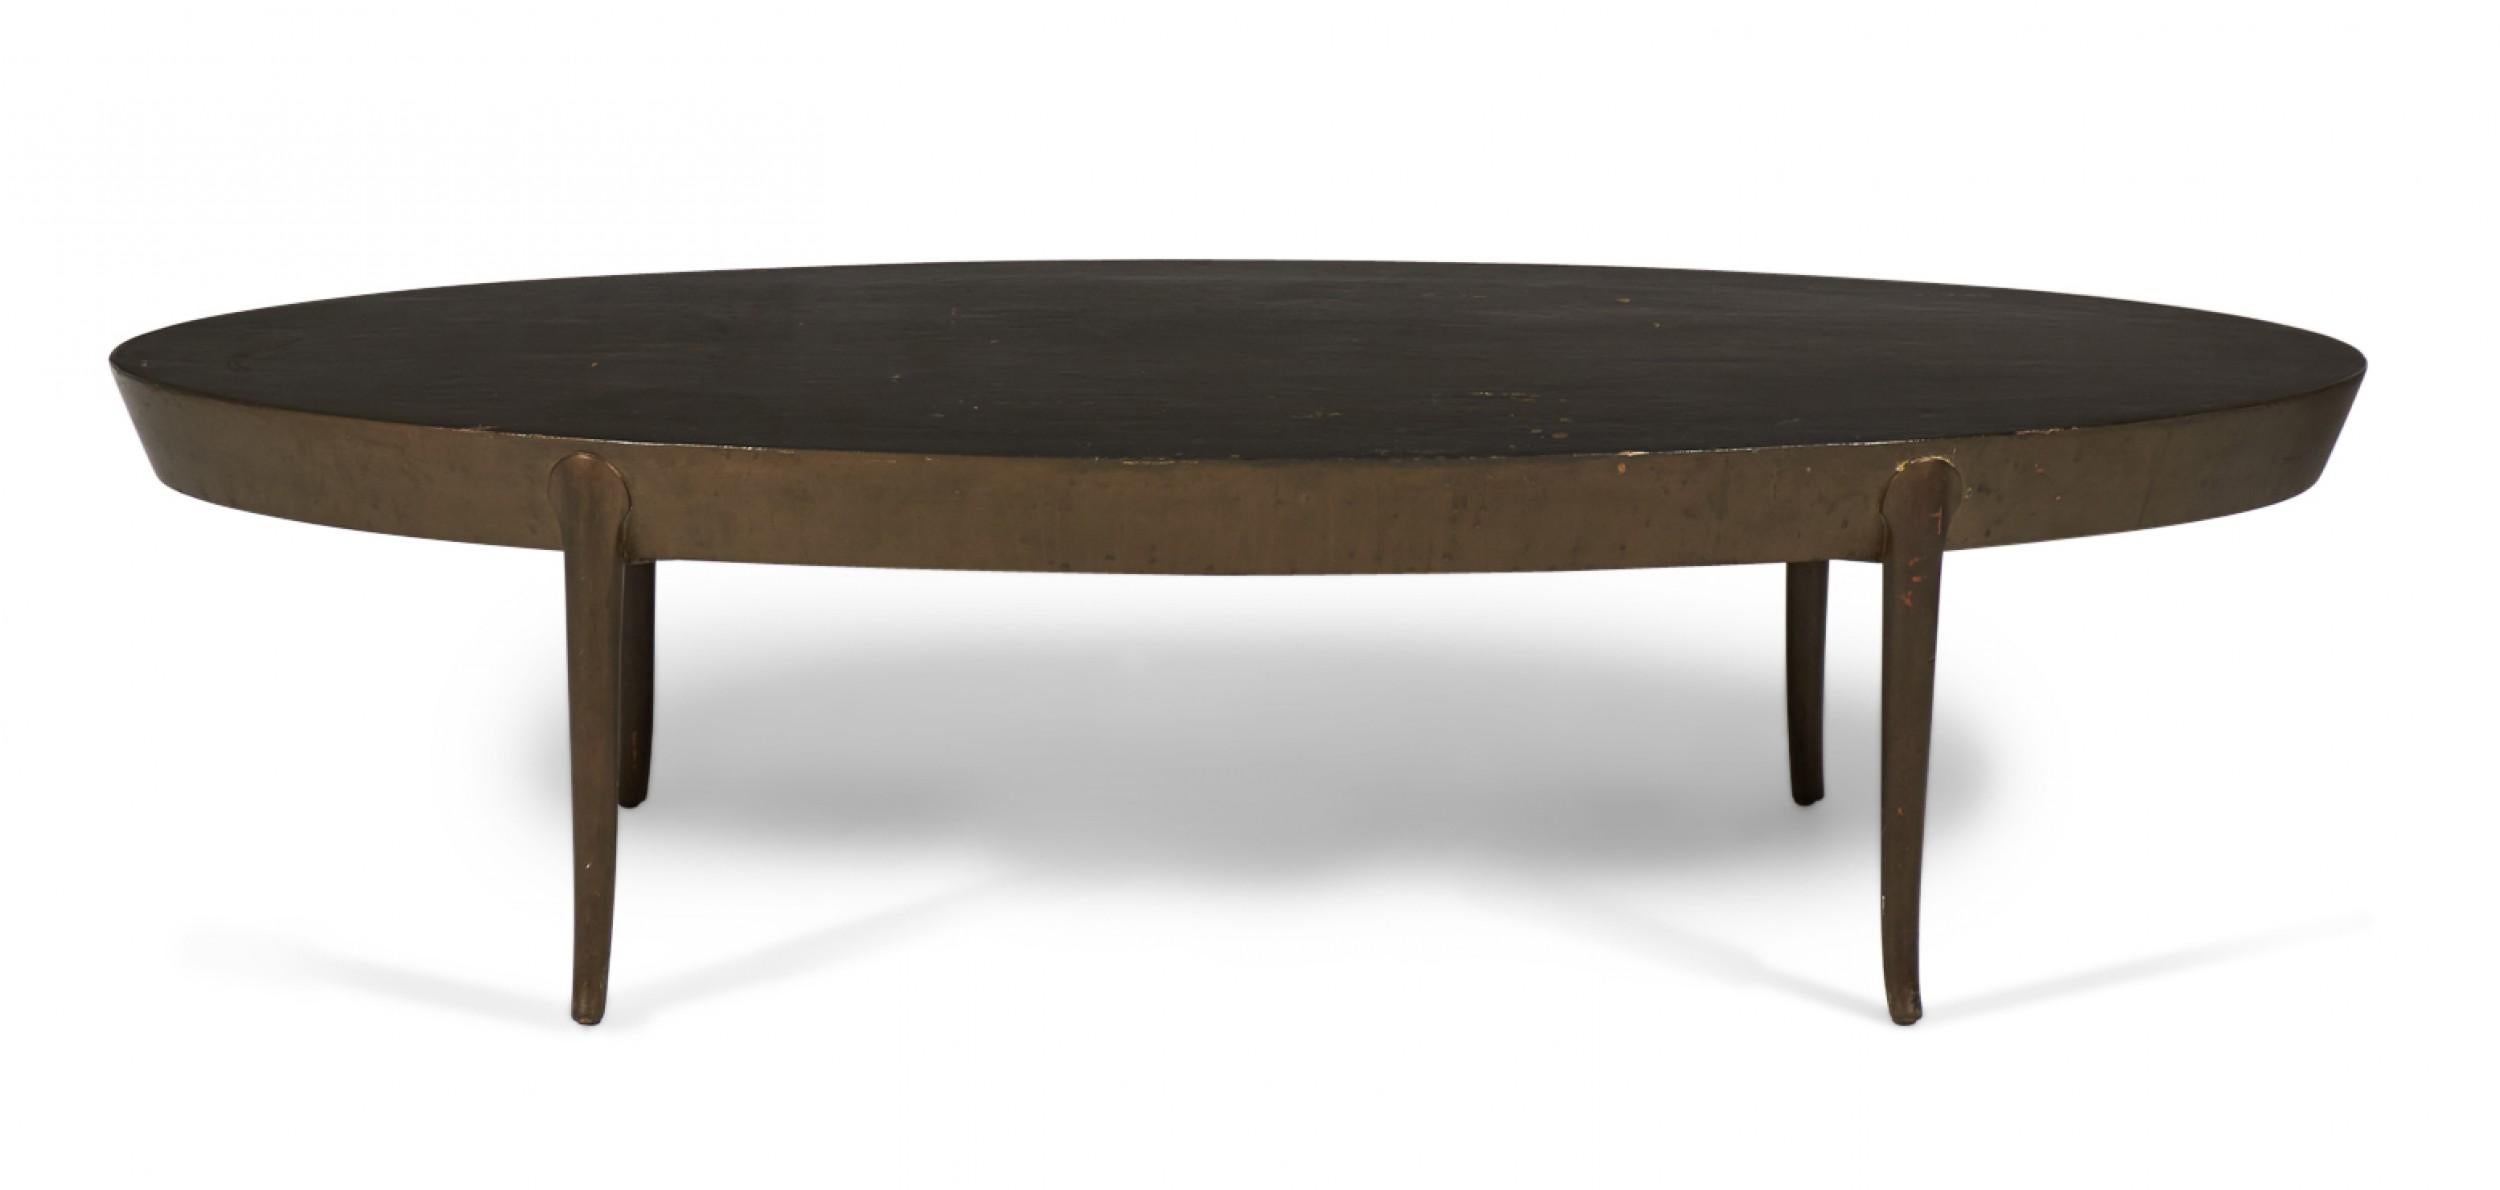 20th Century T.H. Robsjohn-Gibbings American Mid-Century Oval Wooden Cocktail / Coffee Table For Sale